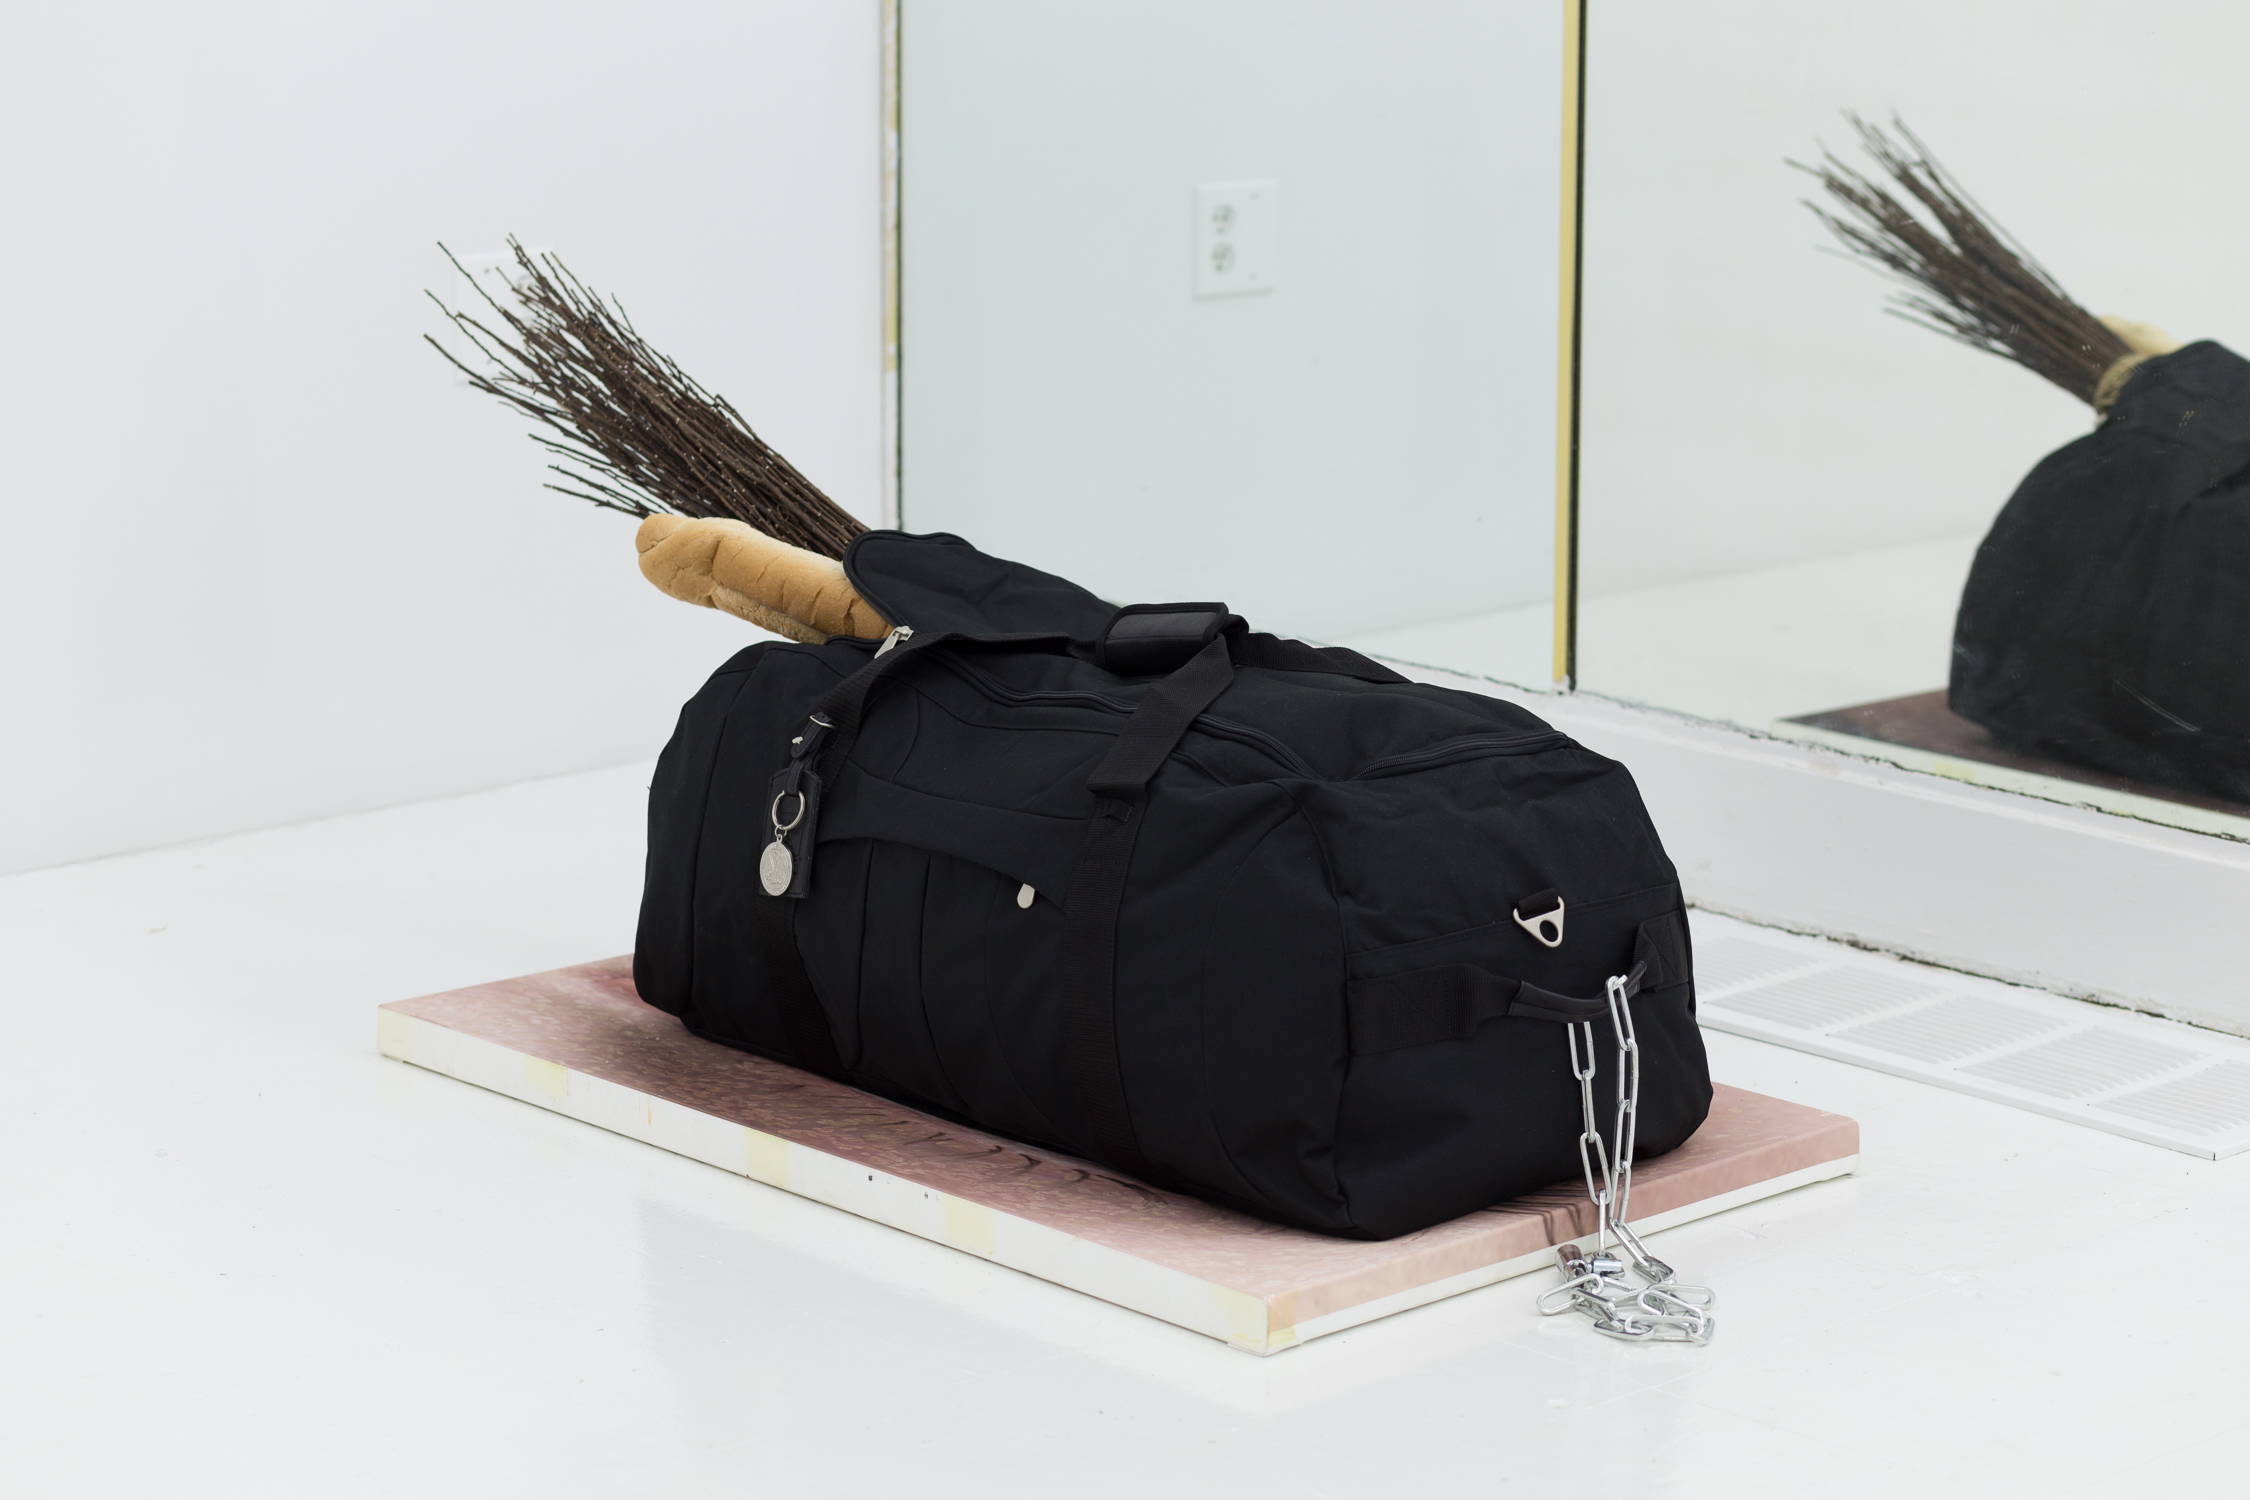 A black duffel bag sits atop a painting of an eye. There is a chain attached to the handle; a baguette and cluster of branches sticks out of the bag